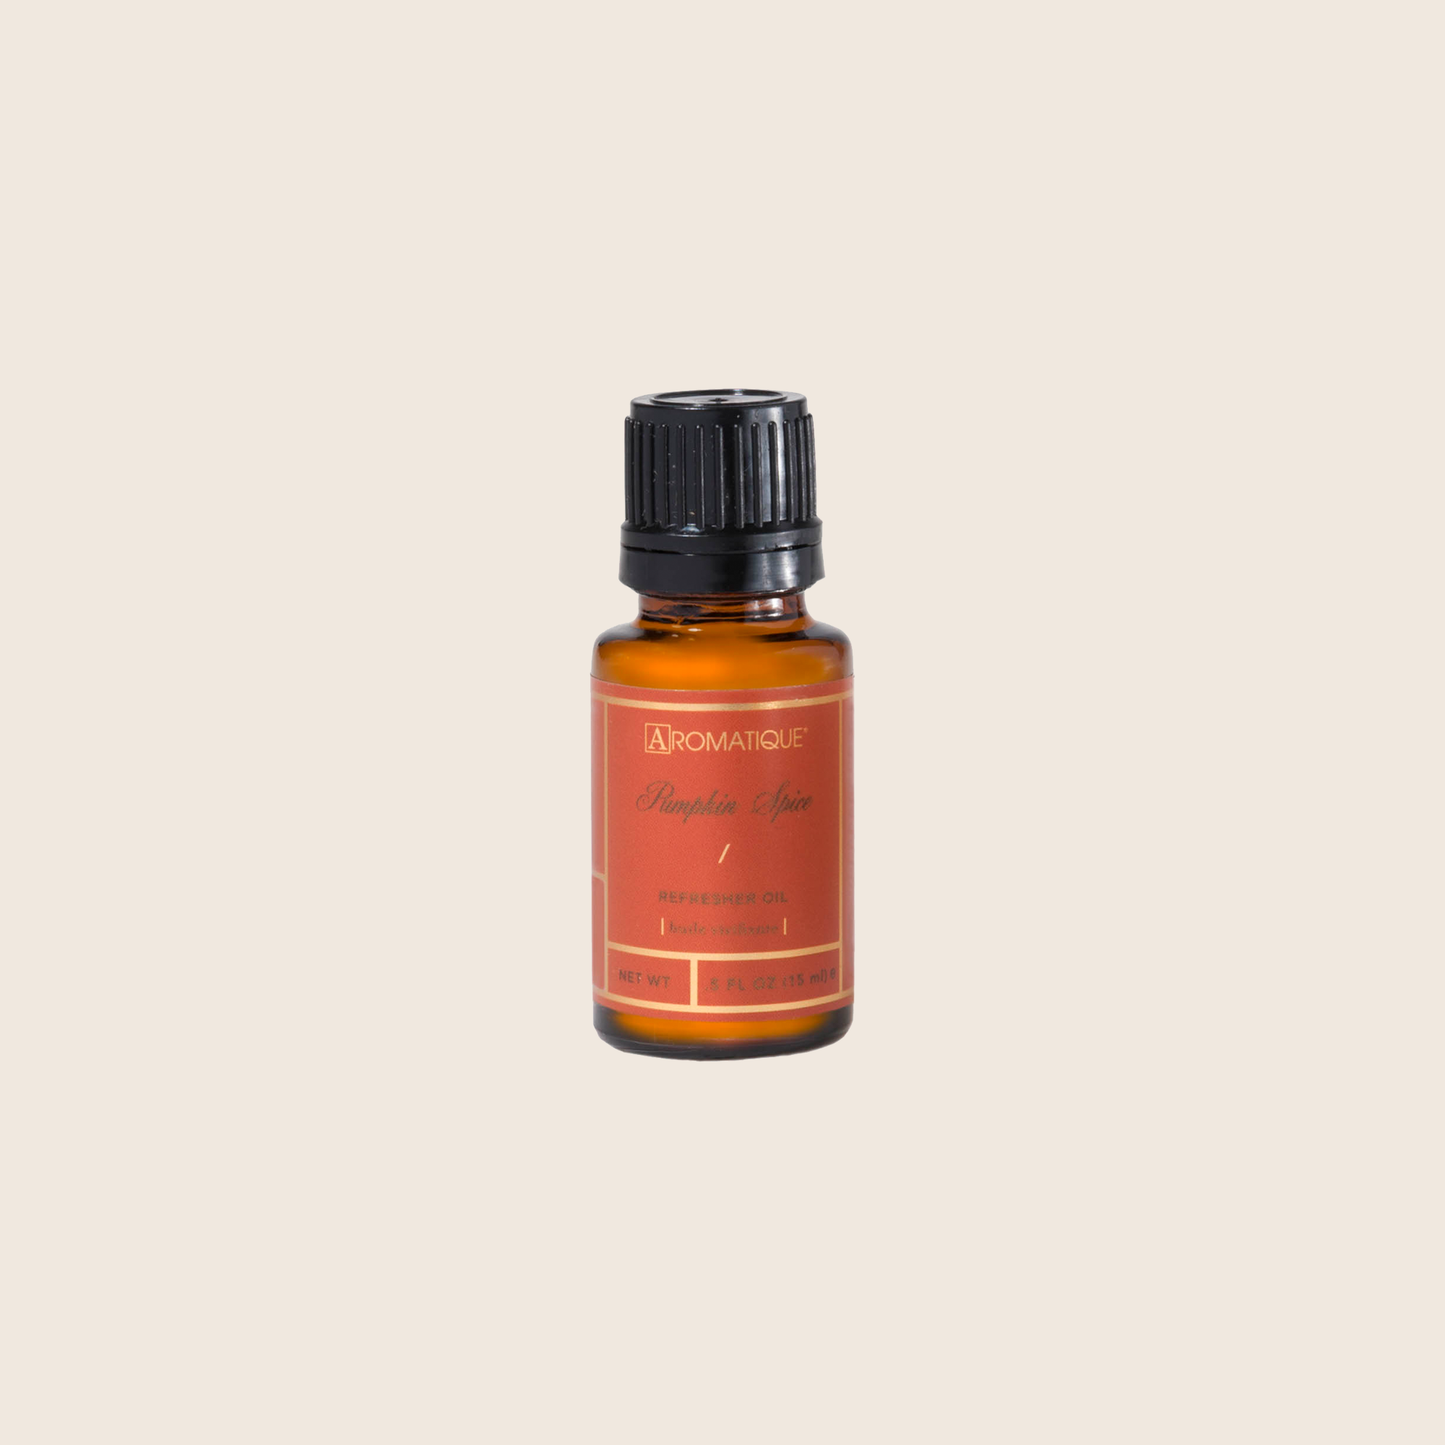 Pumpkin Spice Refresher Oil is designed to refresh your Decorative Fragrance year round. The highly concentrated oil quickly absorbs into the woodchips and fills any space with the aroma of spiced candied pumpkin accented with ribbons of vanilla, maple, and cherry.